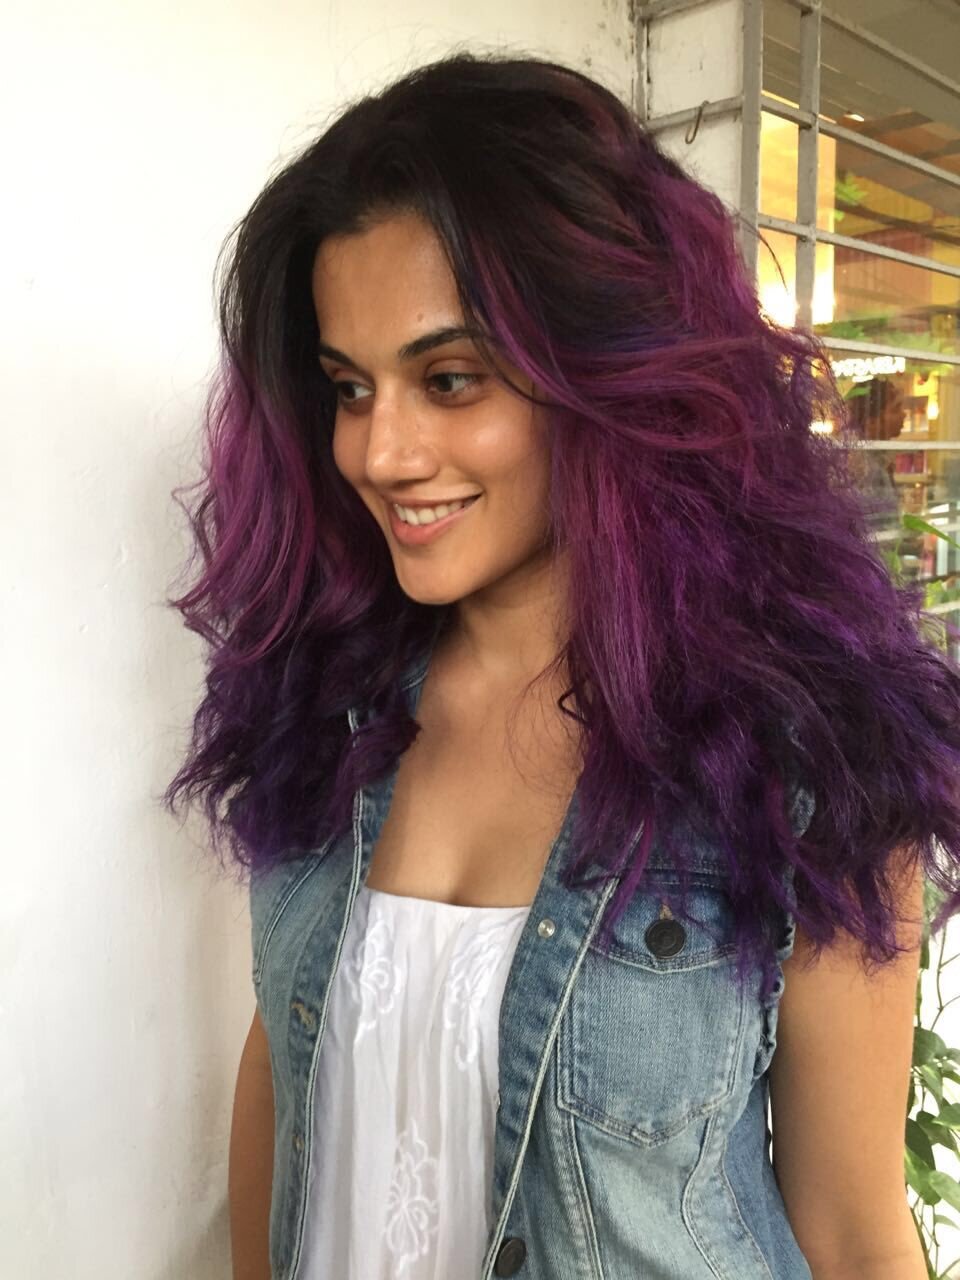 6 Times Celebrities Wowed Us With Their Crazy Hair Colours| POPxo